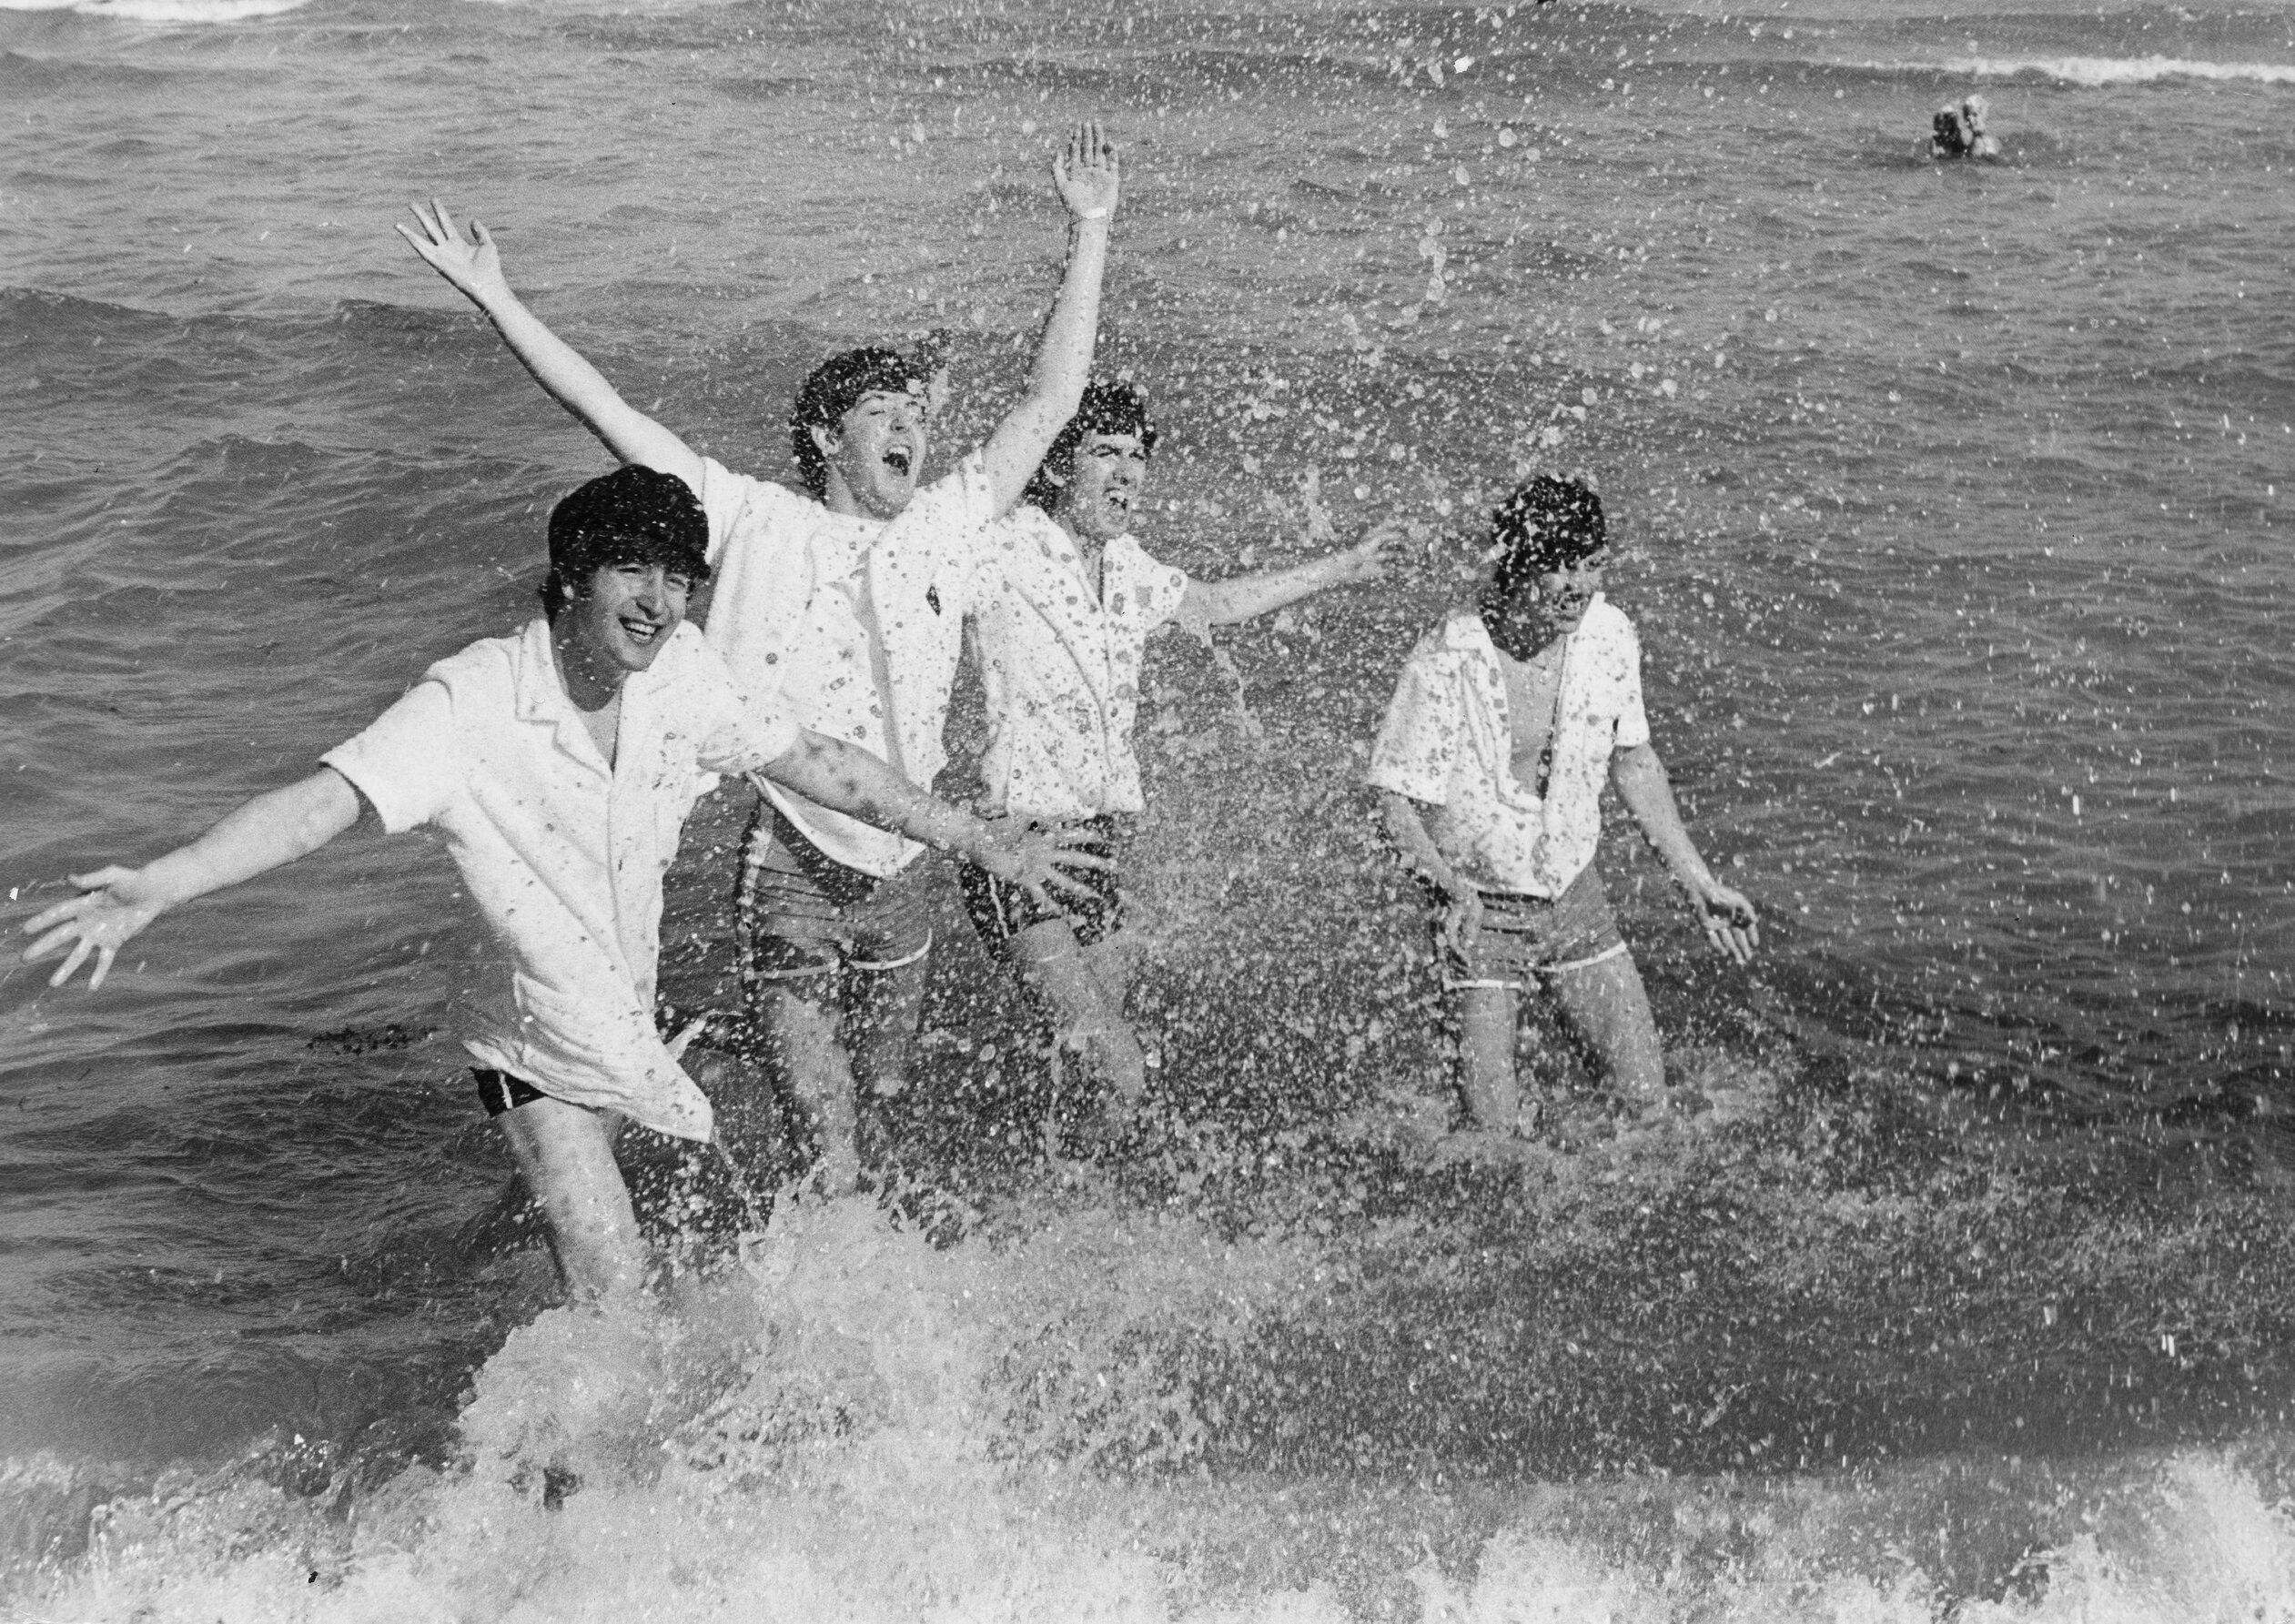 English pop group The Beatles frolicking in the surf at Miami Beach, Florida, February 1964. Left to right: John Lennon (1940 - 1980), Paul McCartney, George Harrison (1943 - 2001), Ringo Starr.